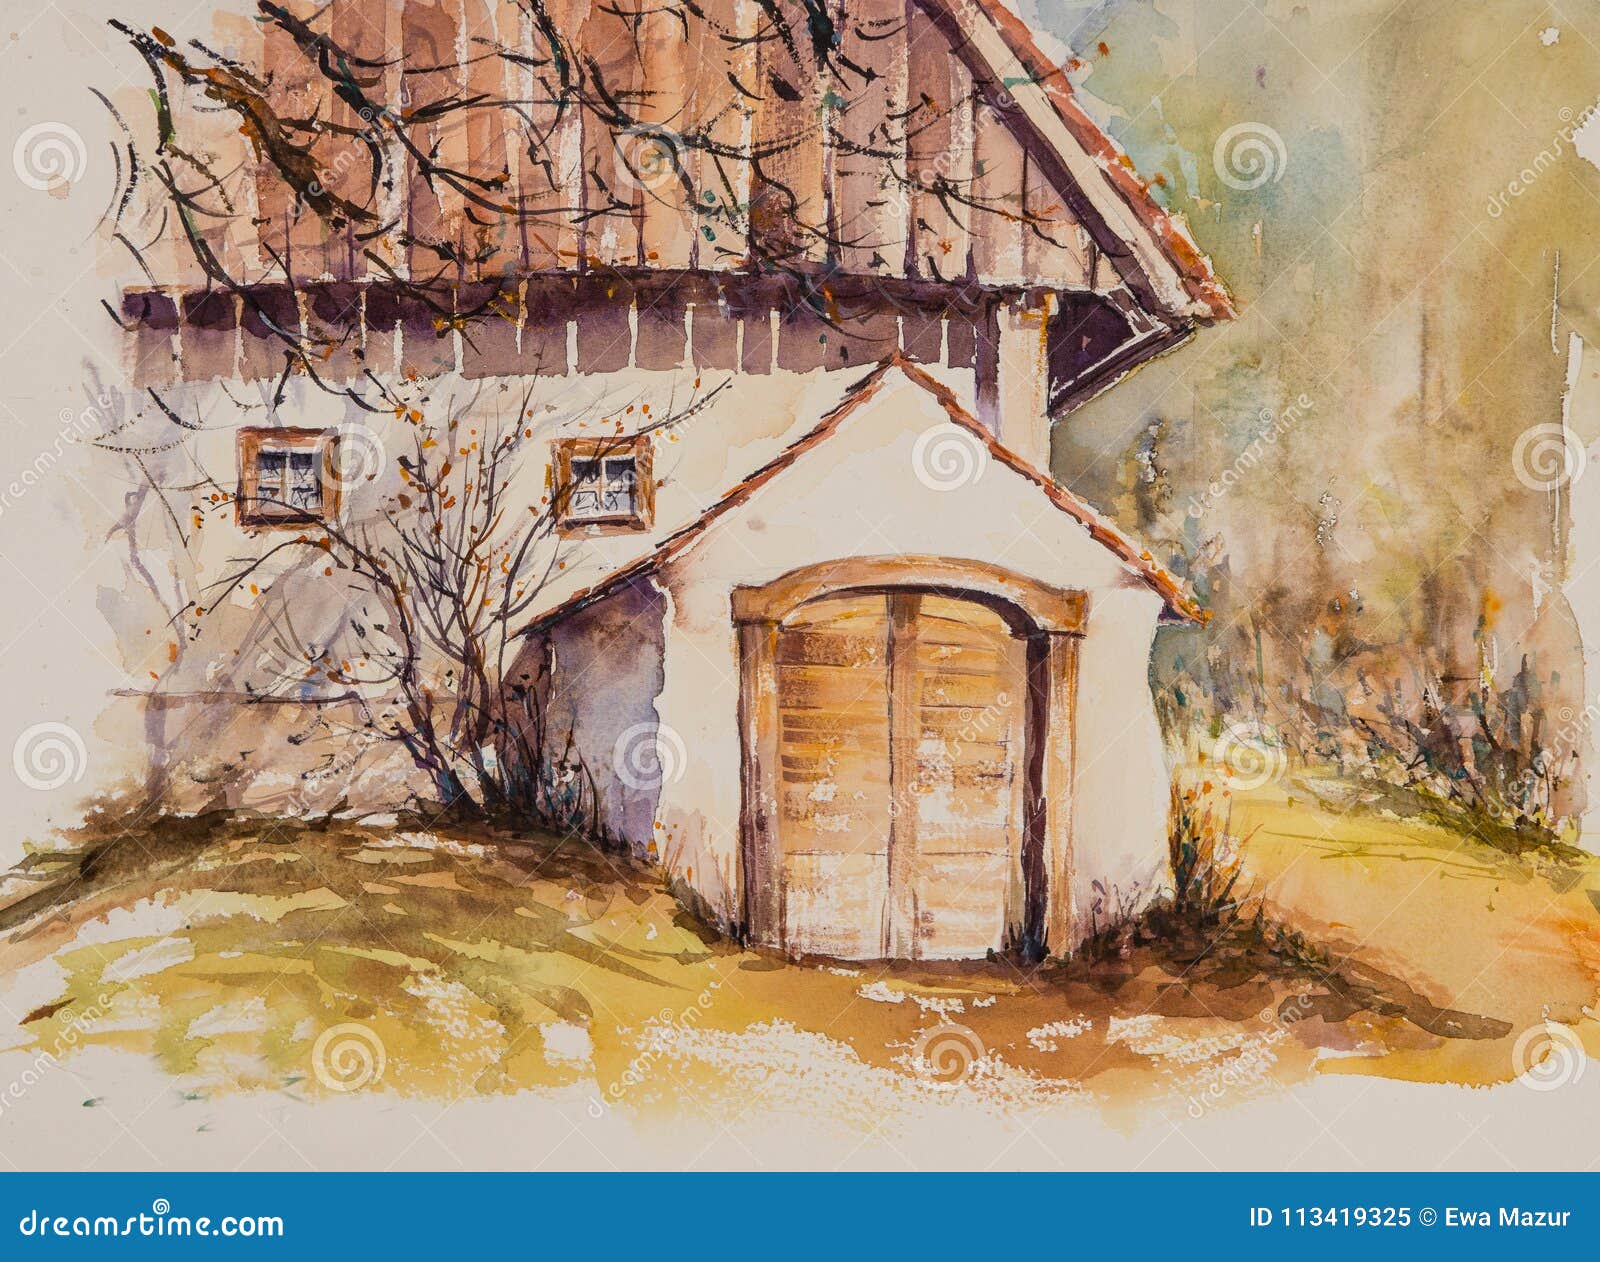 Wine Cellar Watercolors Painted Stock Illustration - Illustration Of Forest, Architecture: 113419325